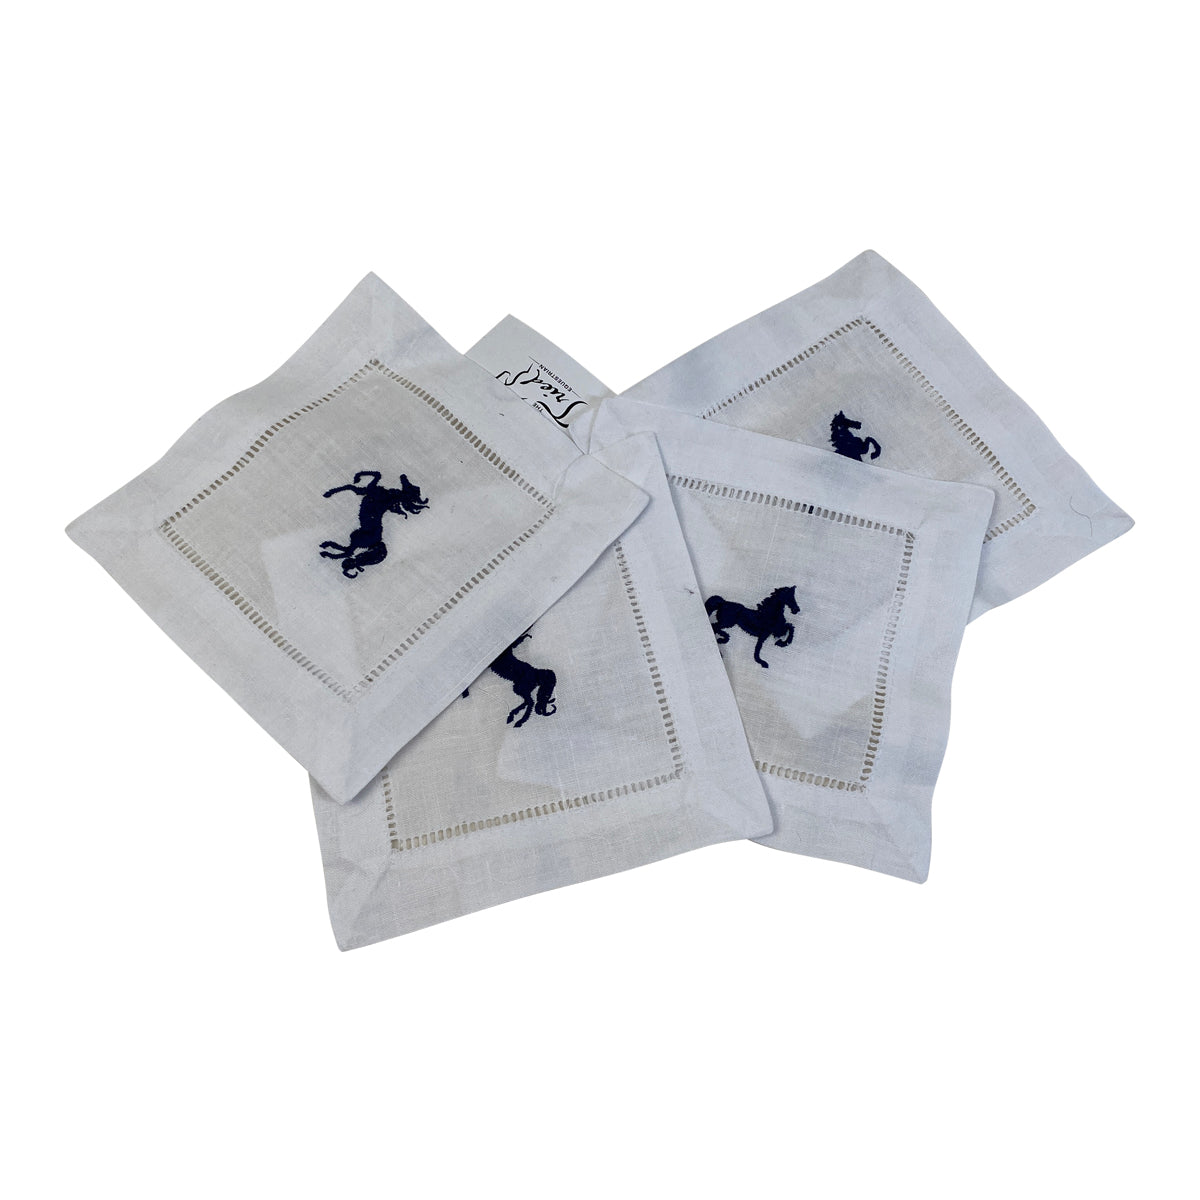 Linen Coasters Set of 4 in White/Navy